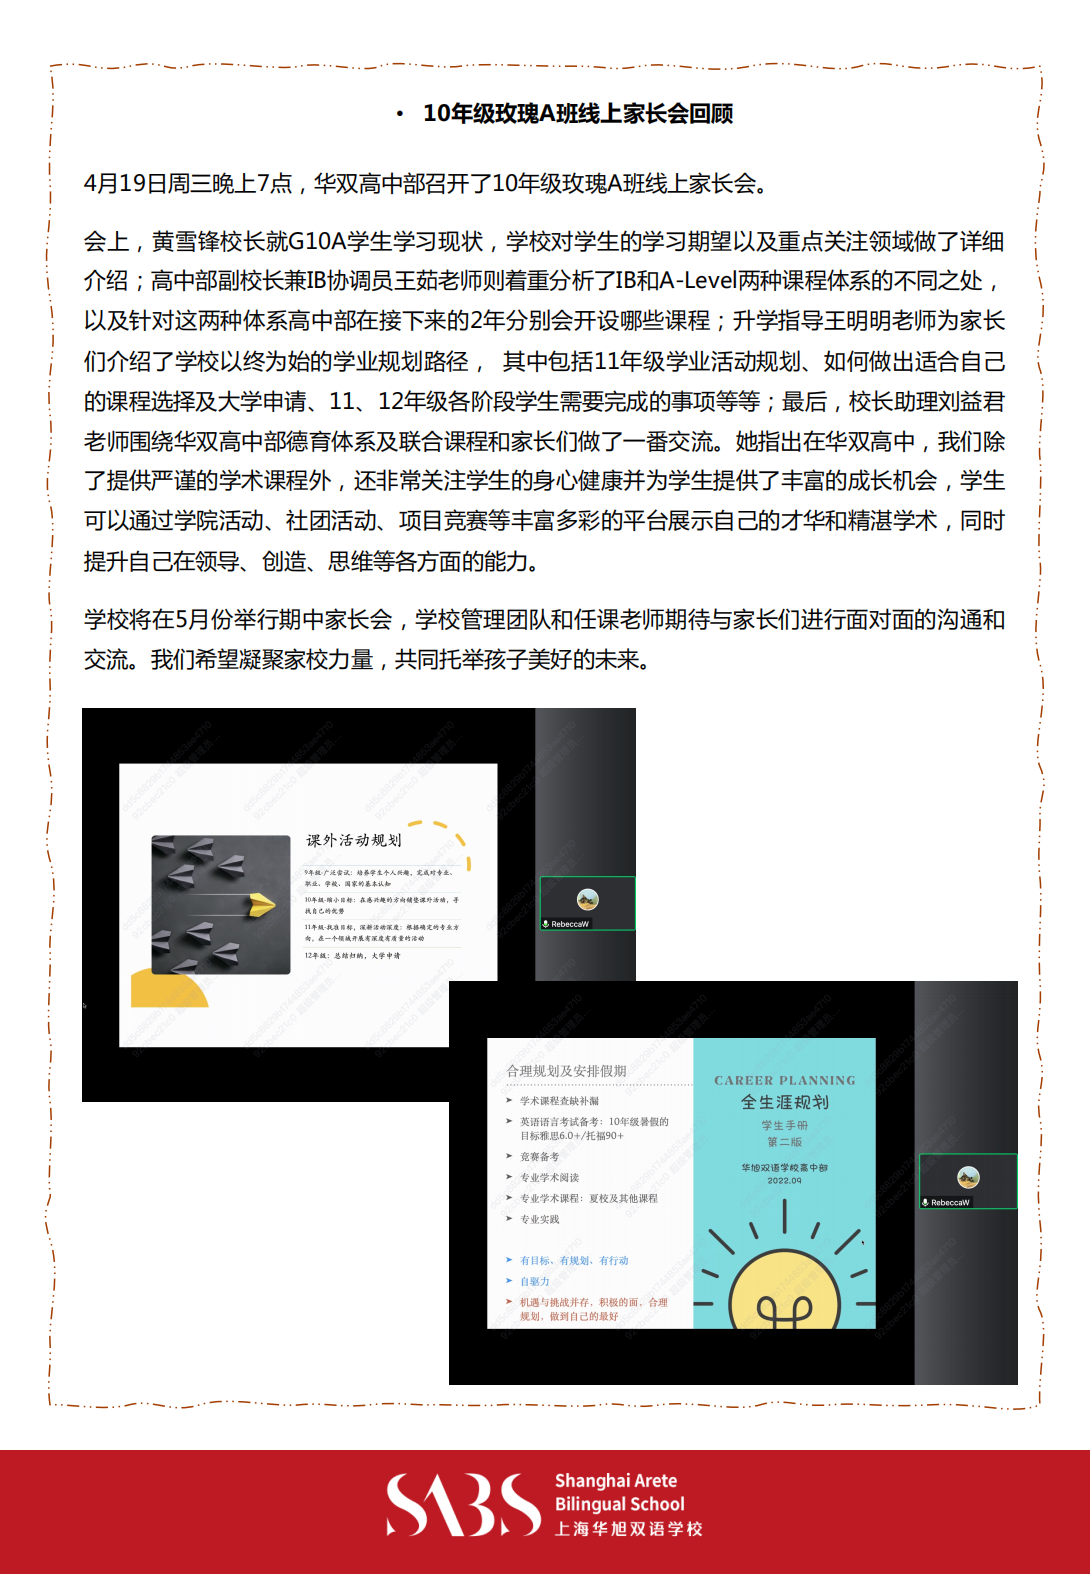 HS 5th Issue Newsletter pptx（Chinese)_06.png